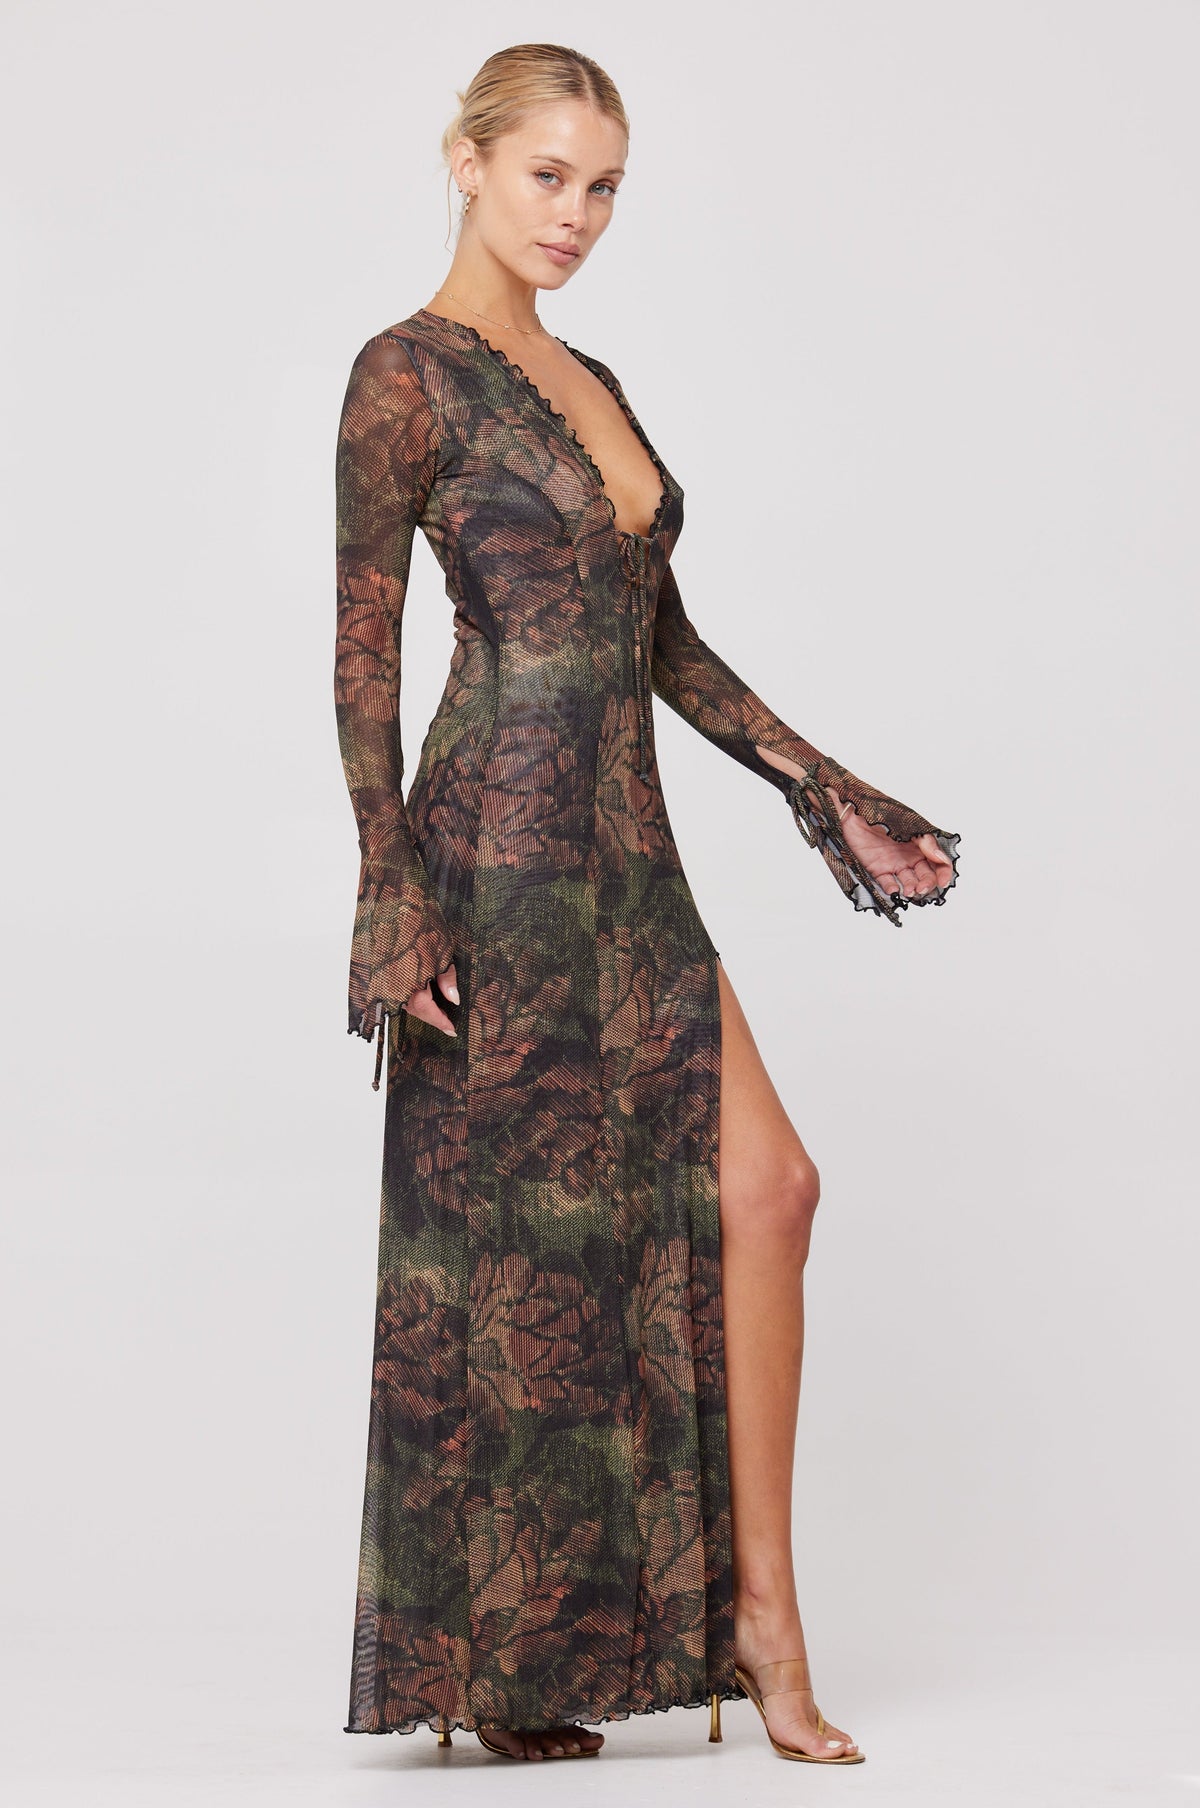 This is an image of Lennon Maxi Dress in Autumn - RESA featuring a model wearing the dress